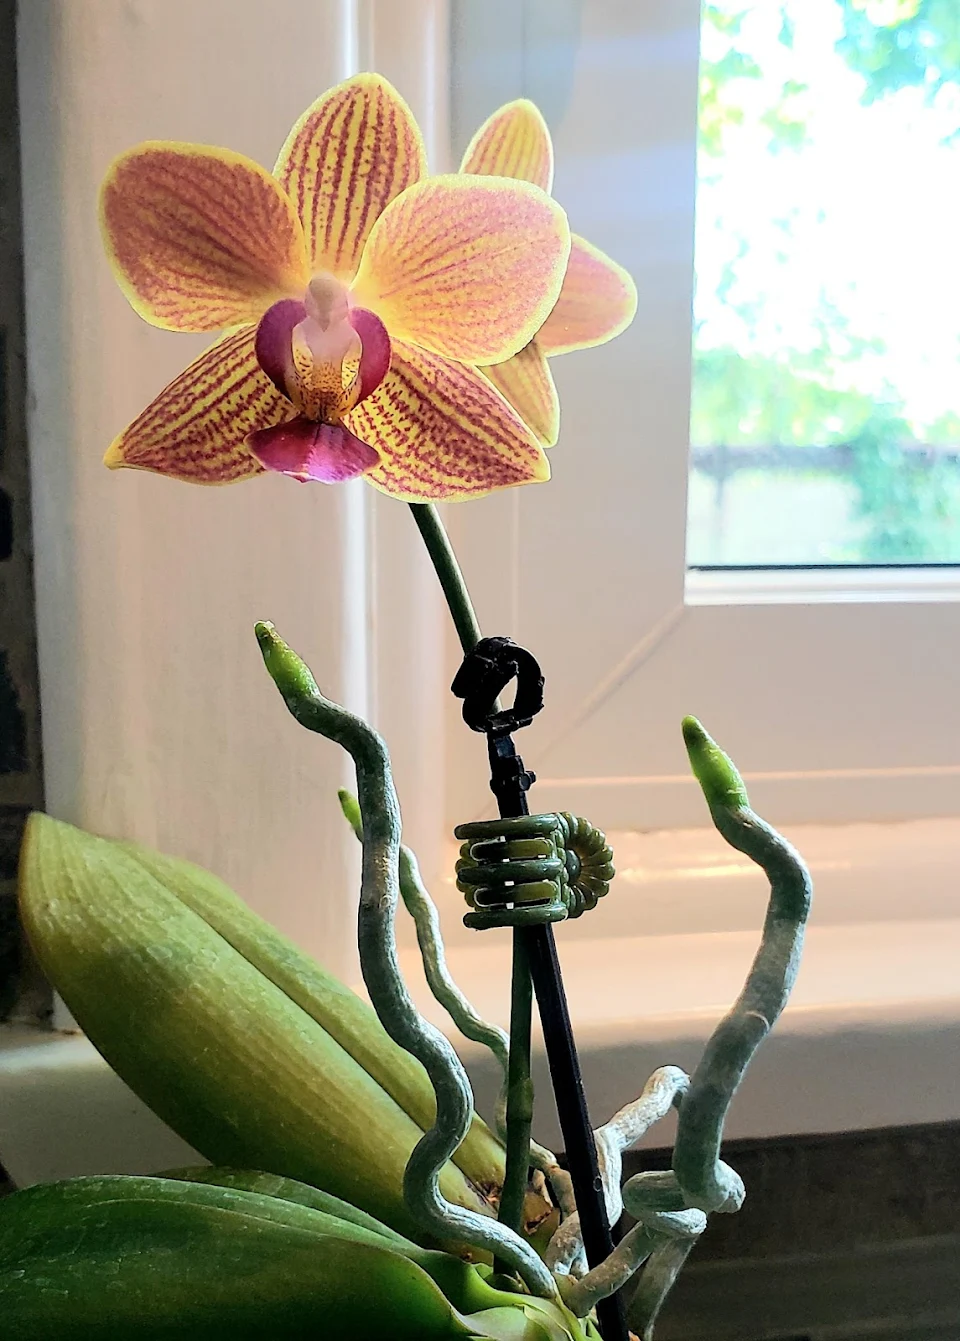 This is only the second time in 12 years this orchid has flowered.